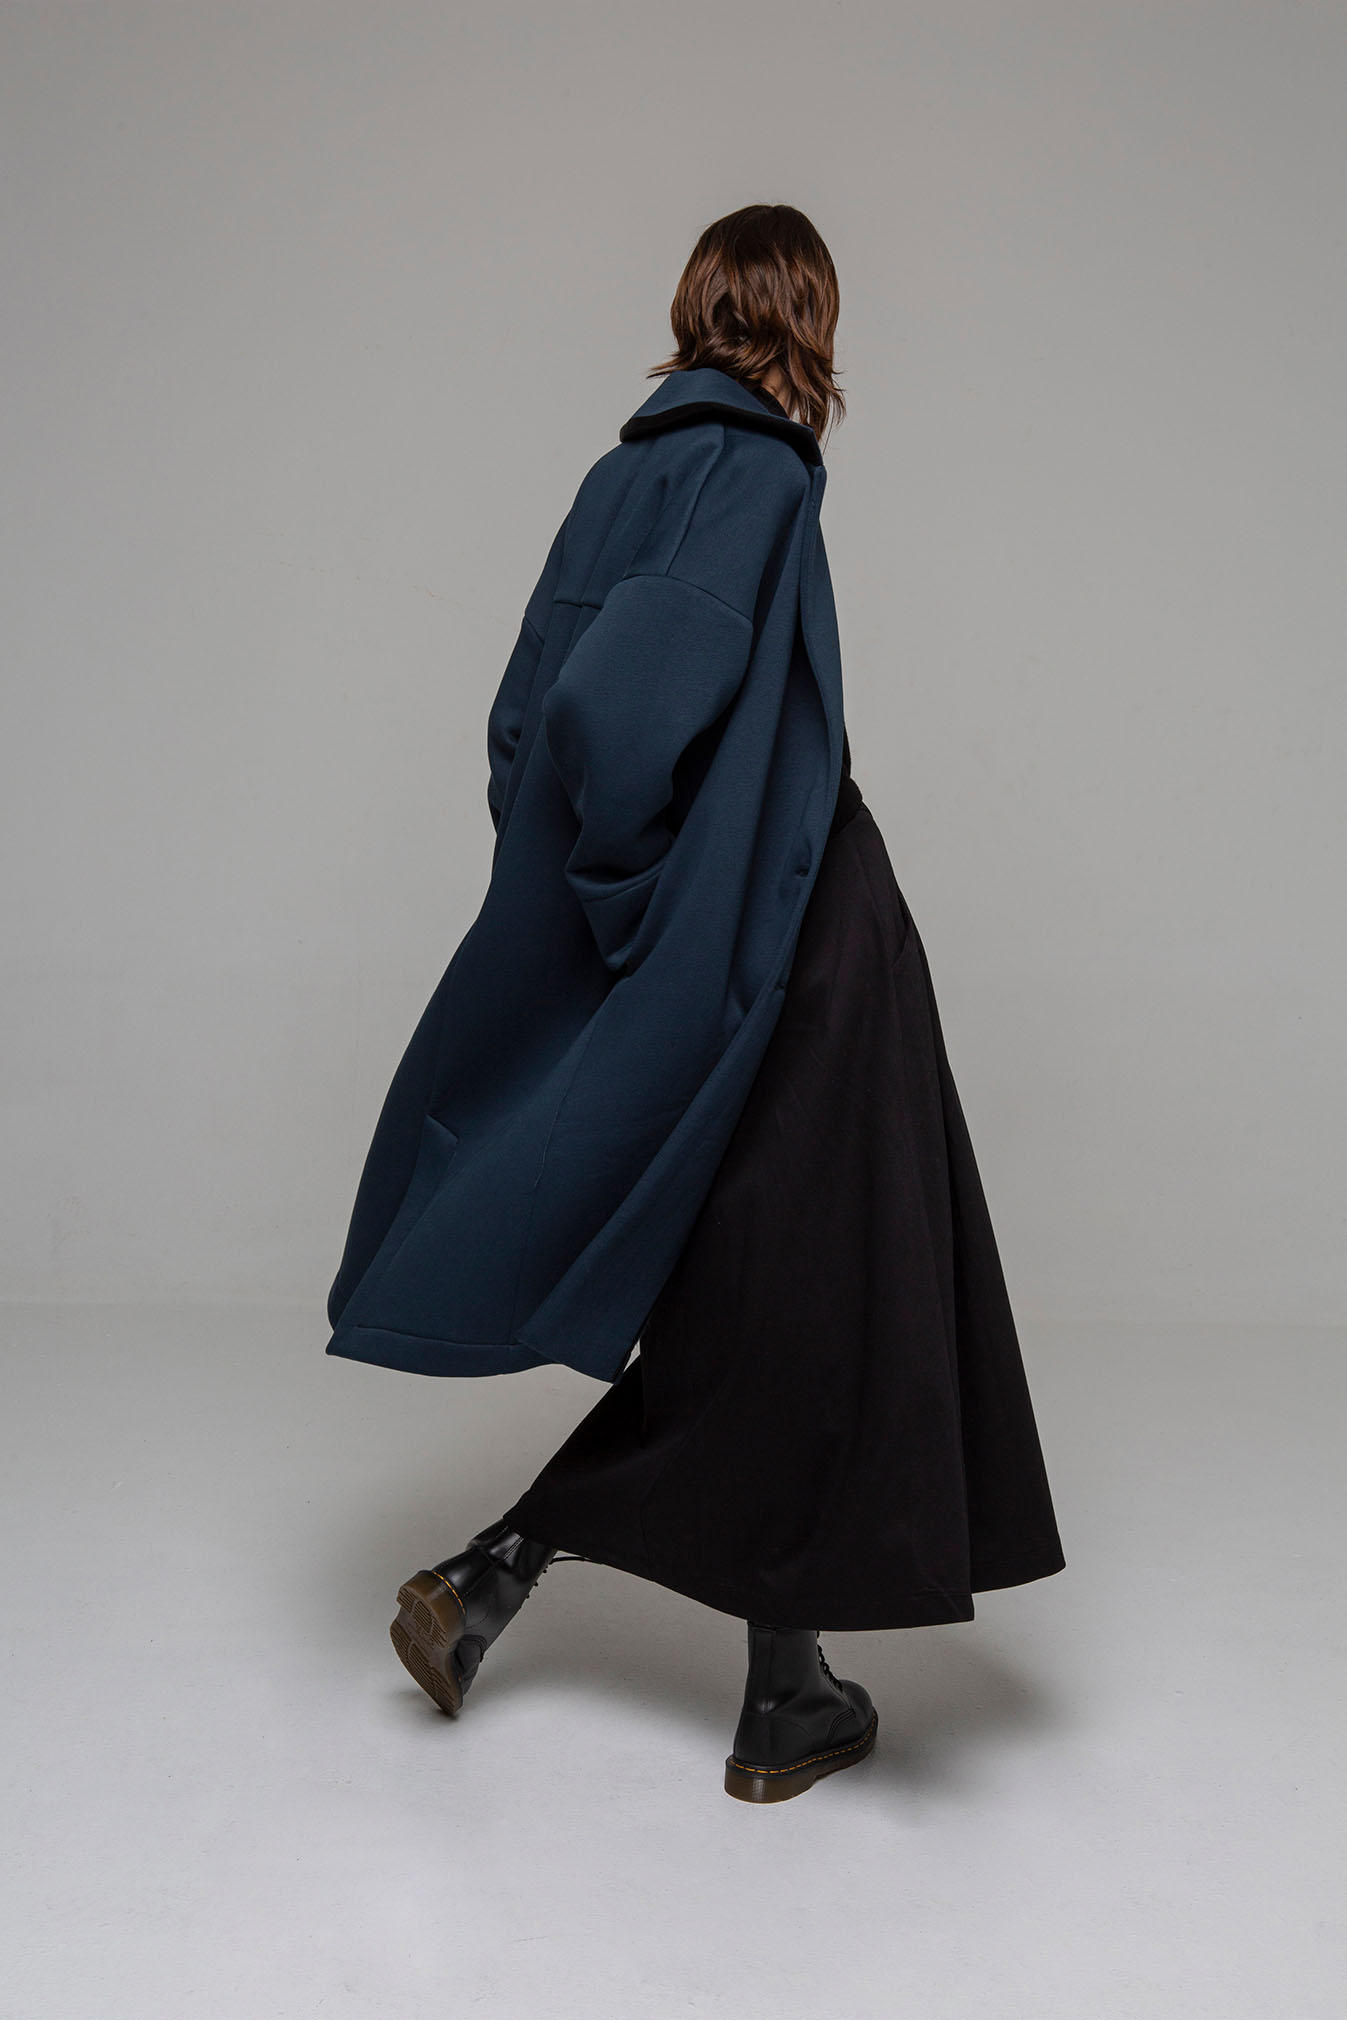 Women's Jersey Coat by Noble Athens